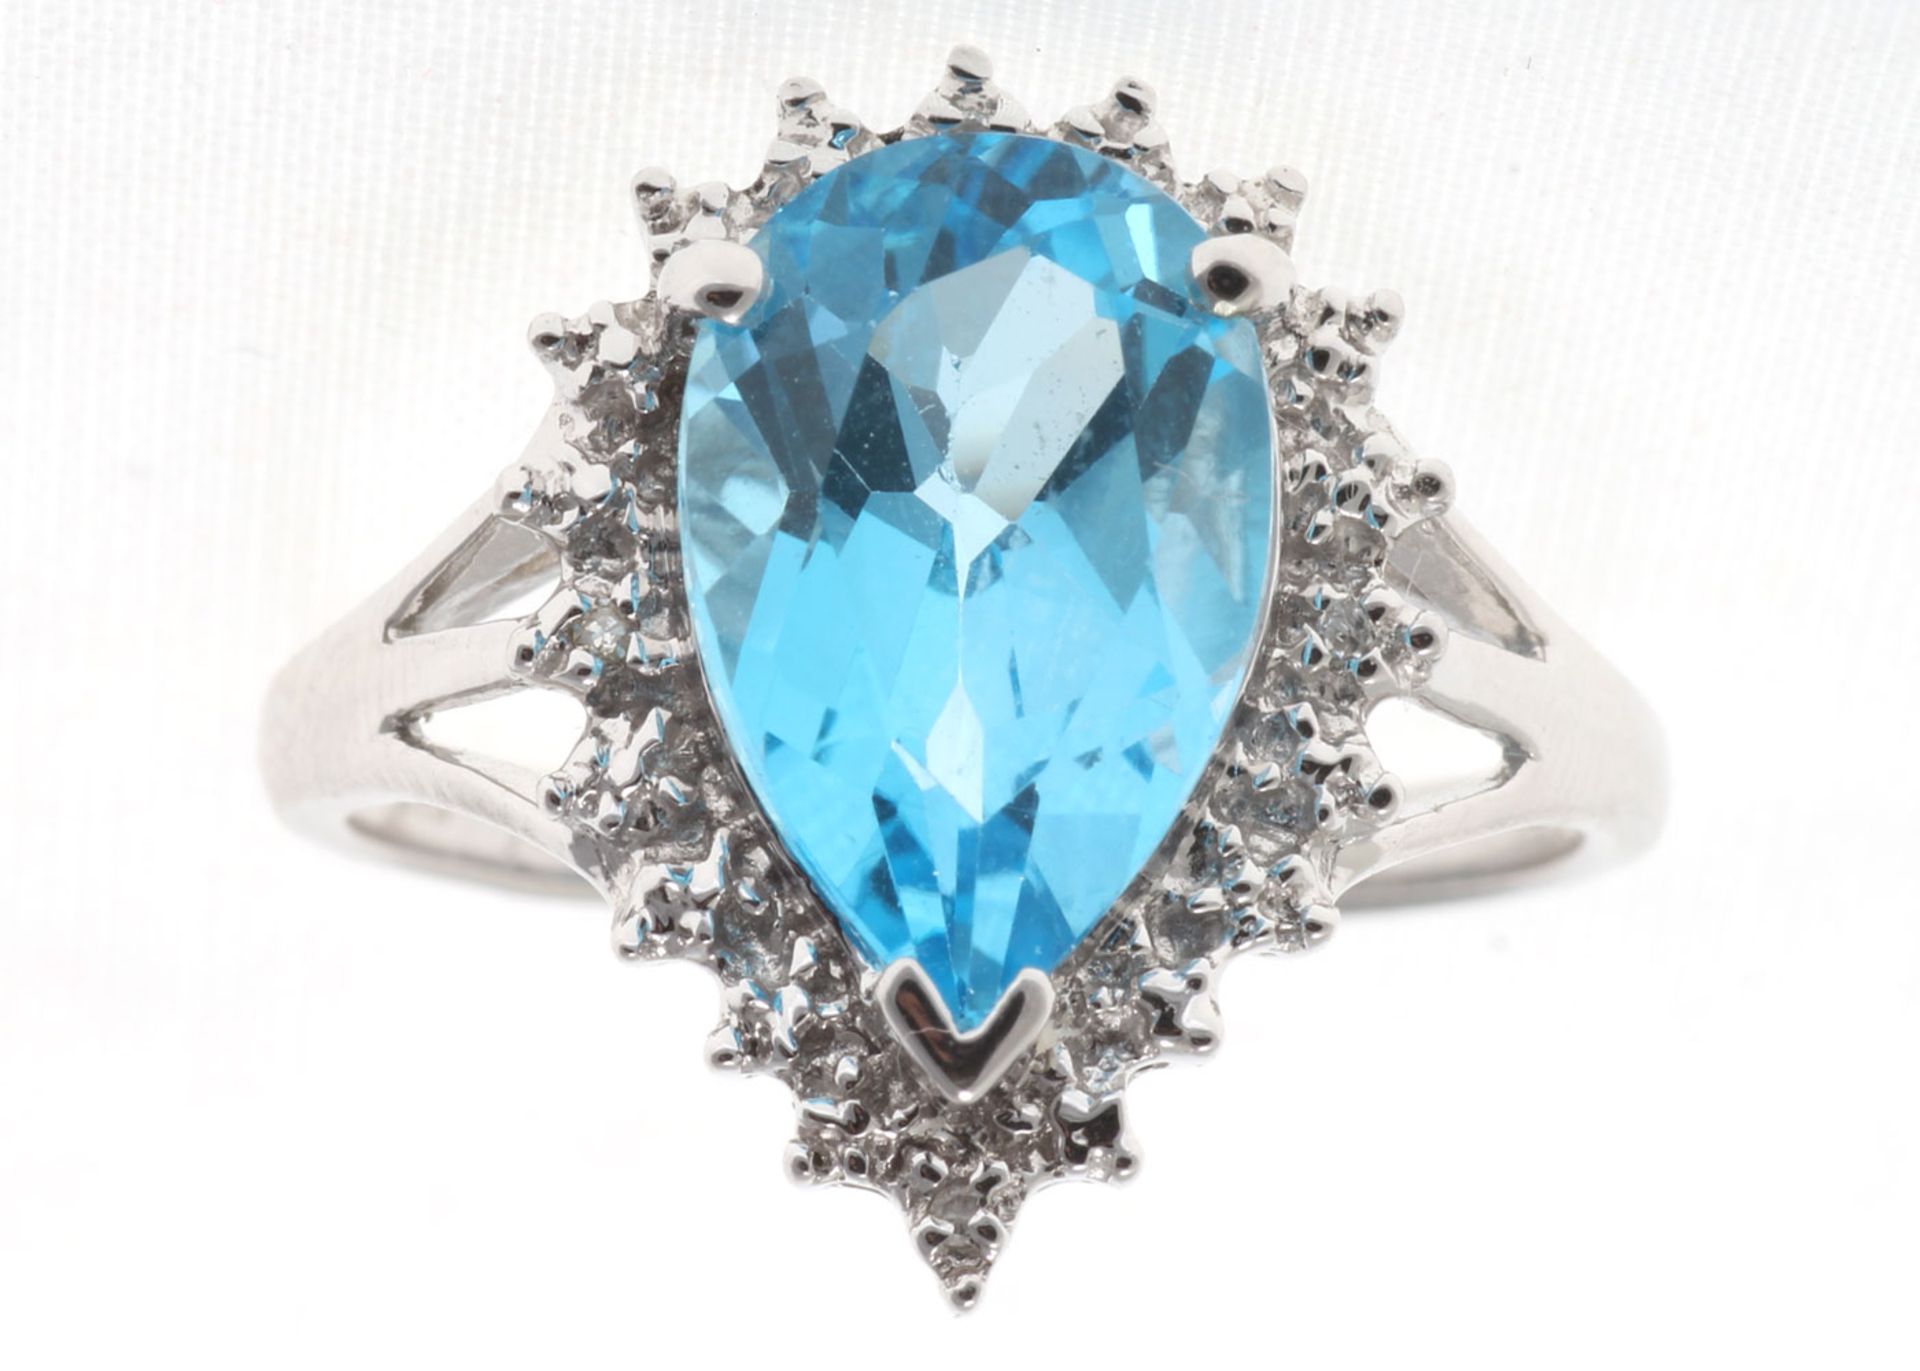 9ct White Gold Diamond And Blue Topaz Ring 0.01 Carats - Image 5 of 6